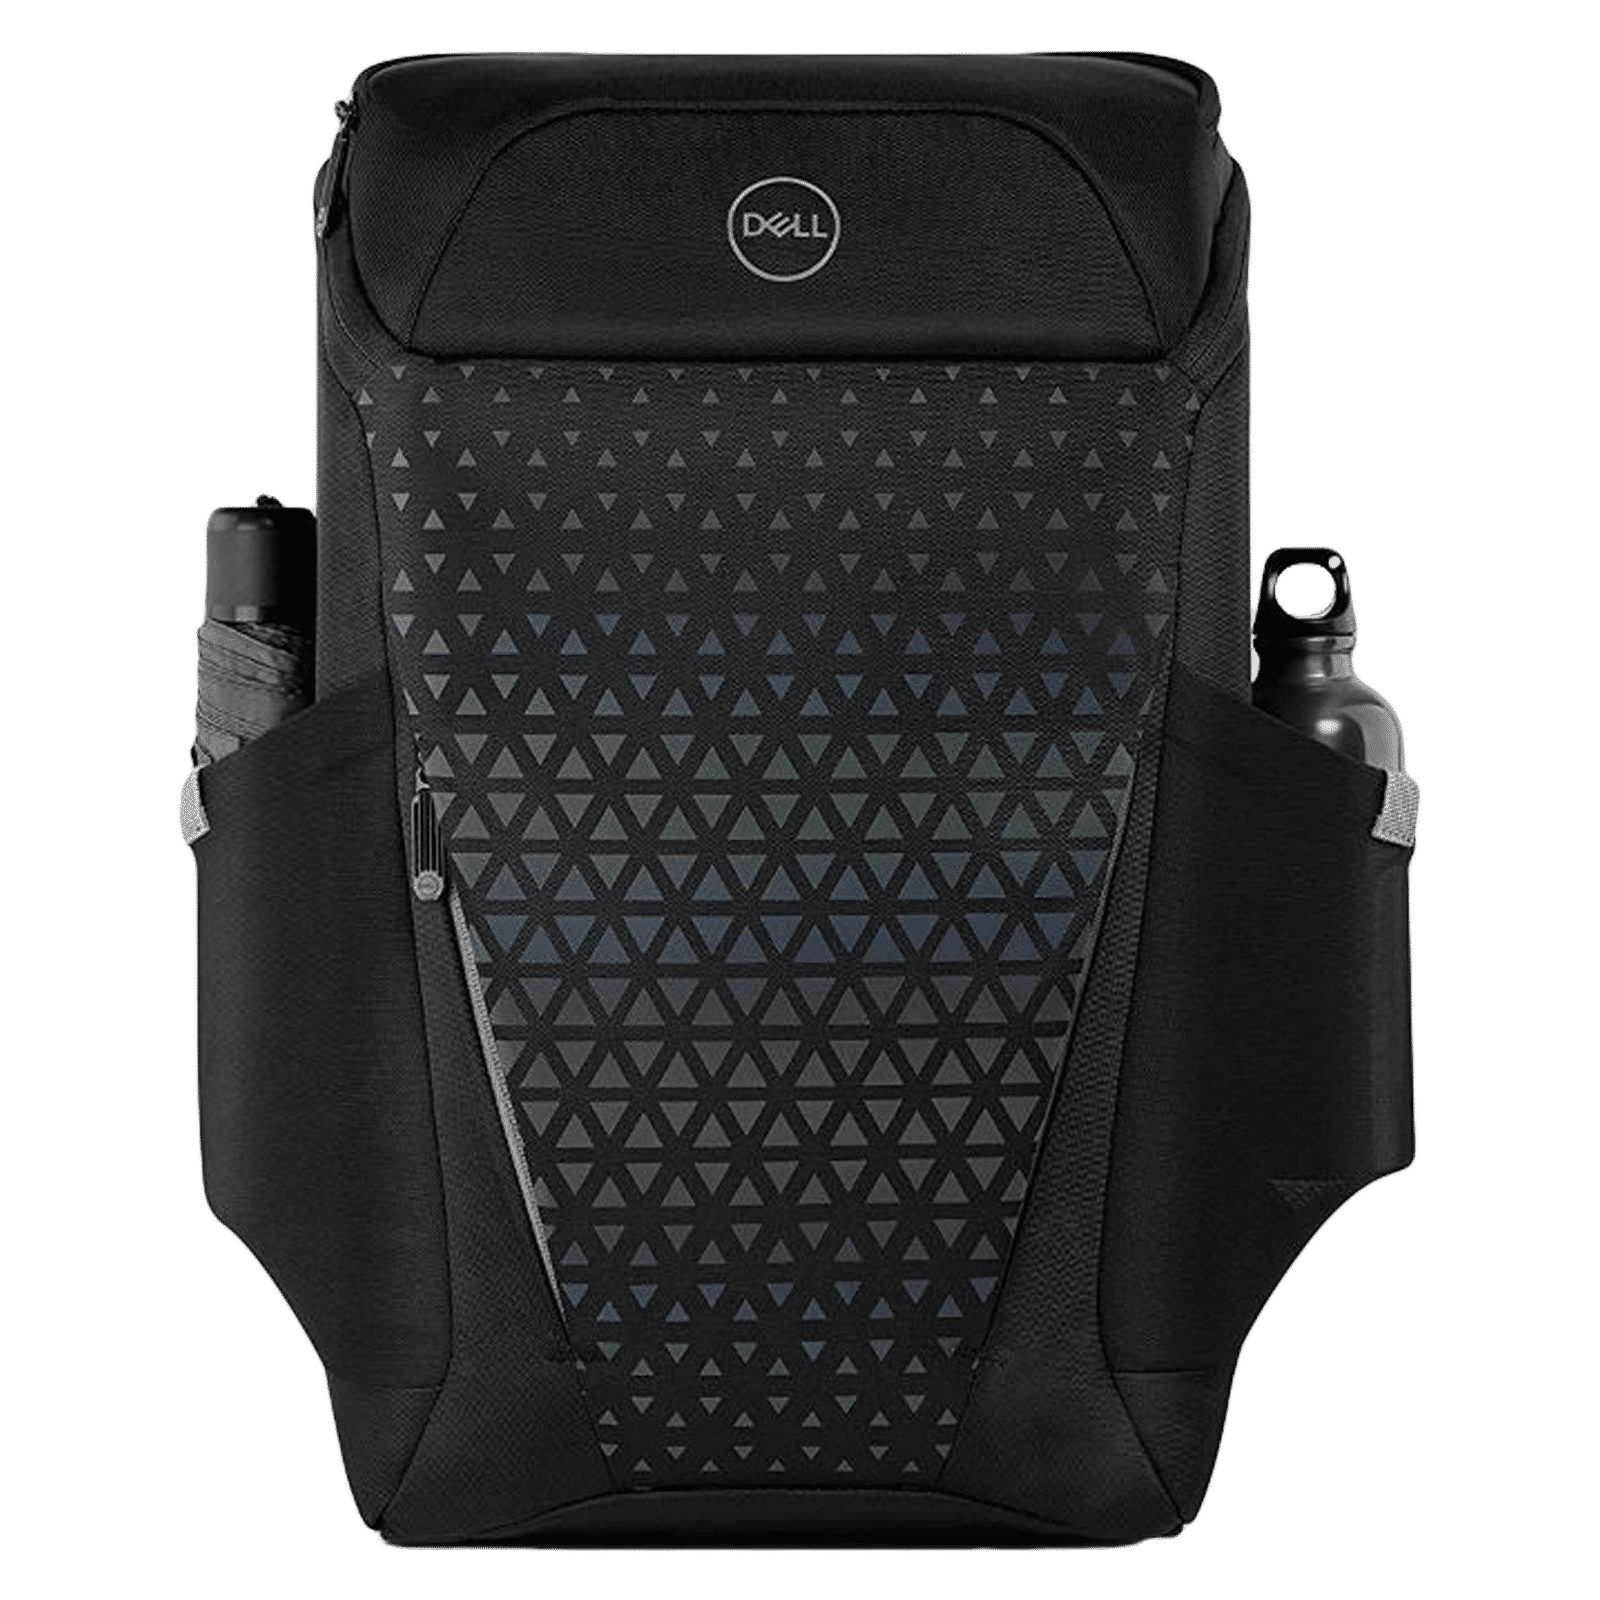 Work from anywhere with these awesome Dell laptop bags